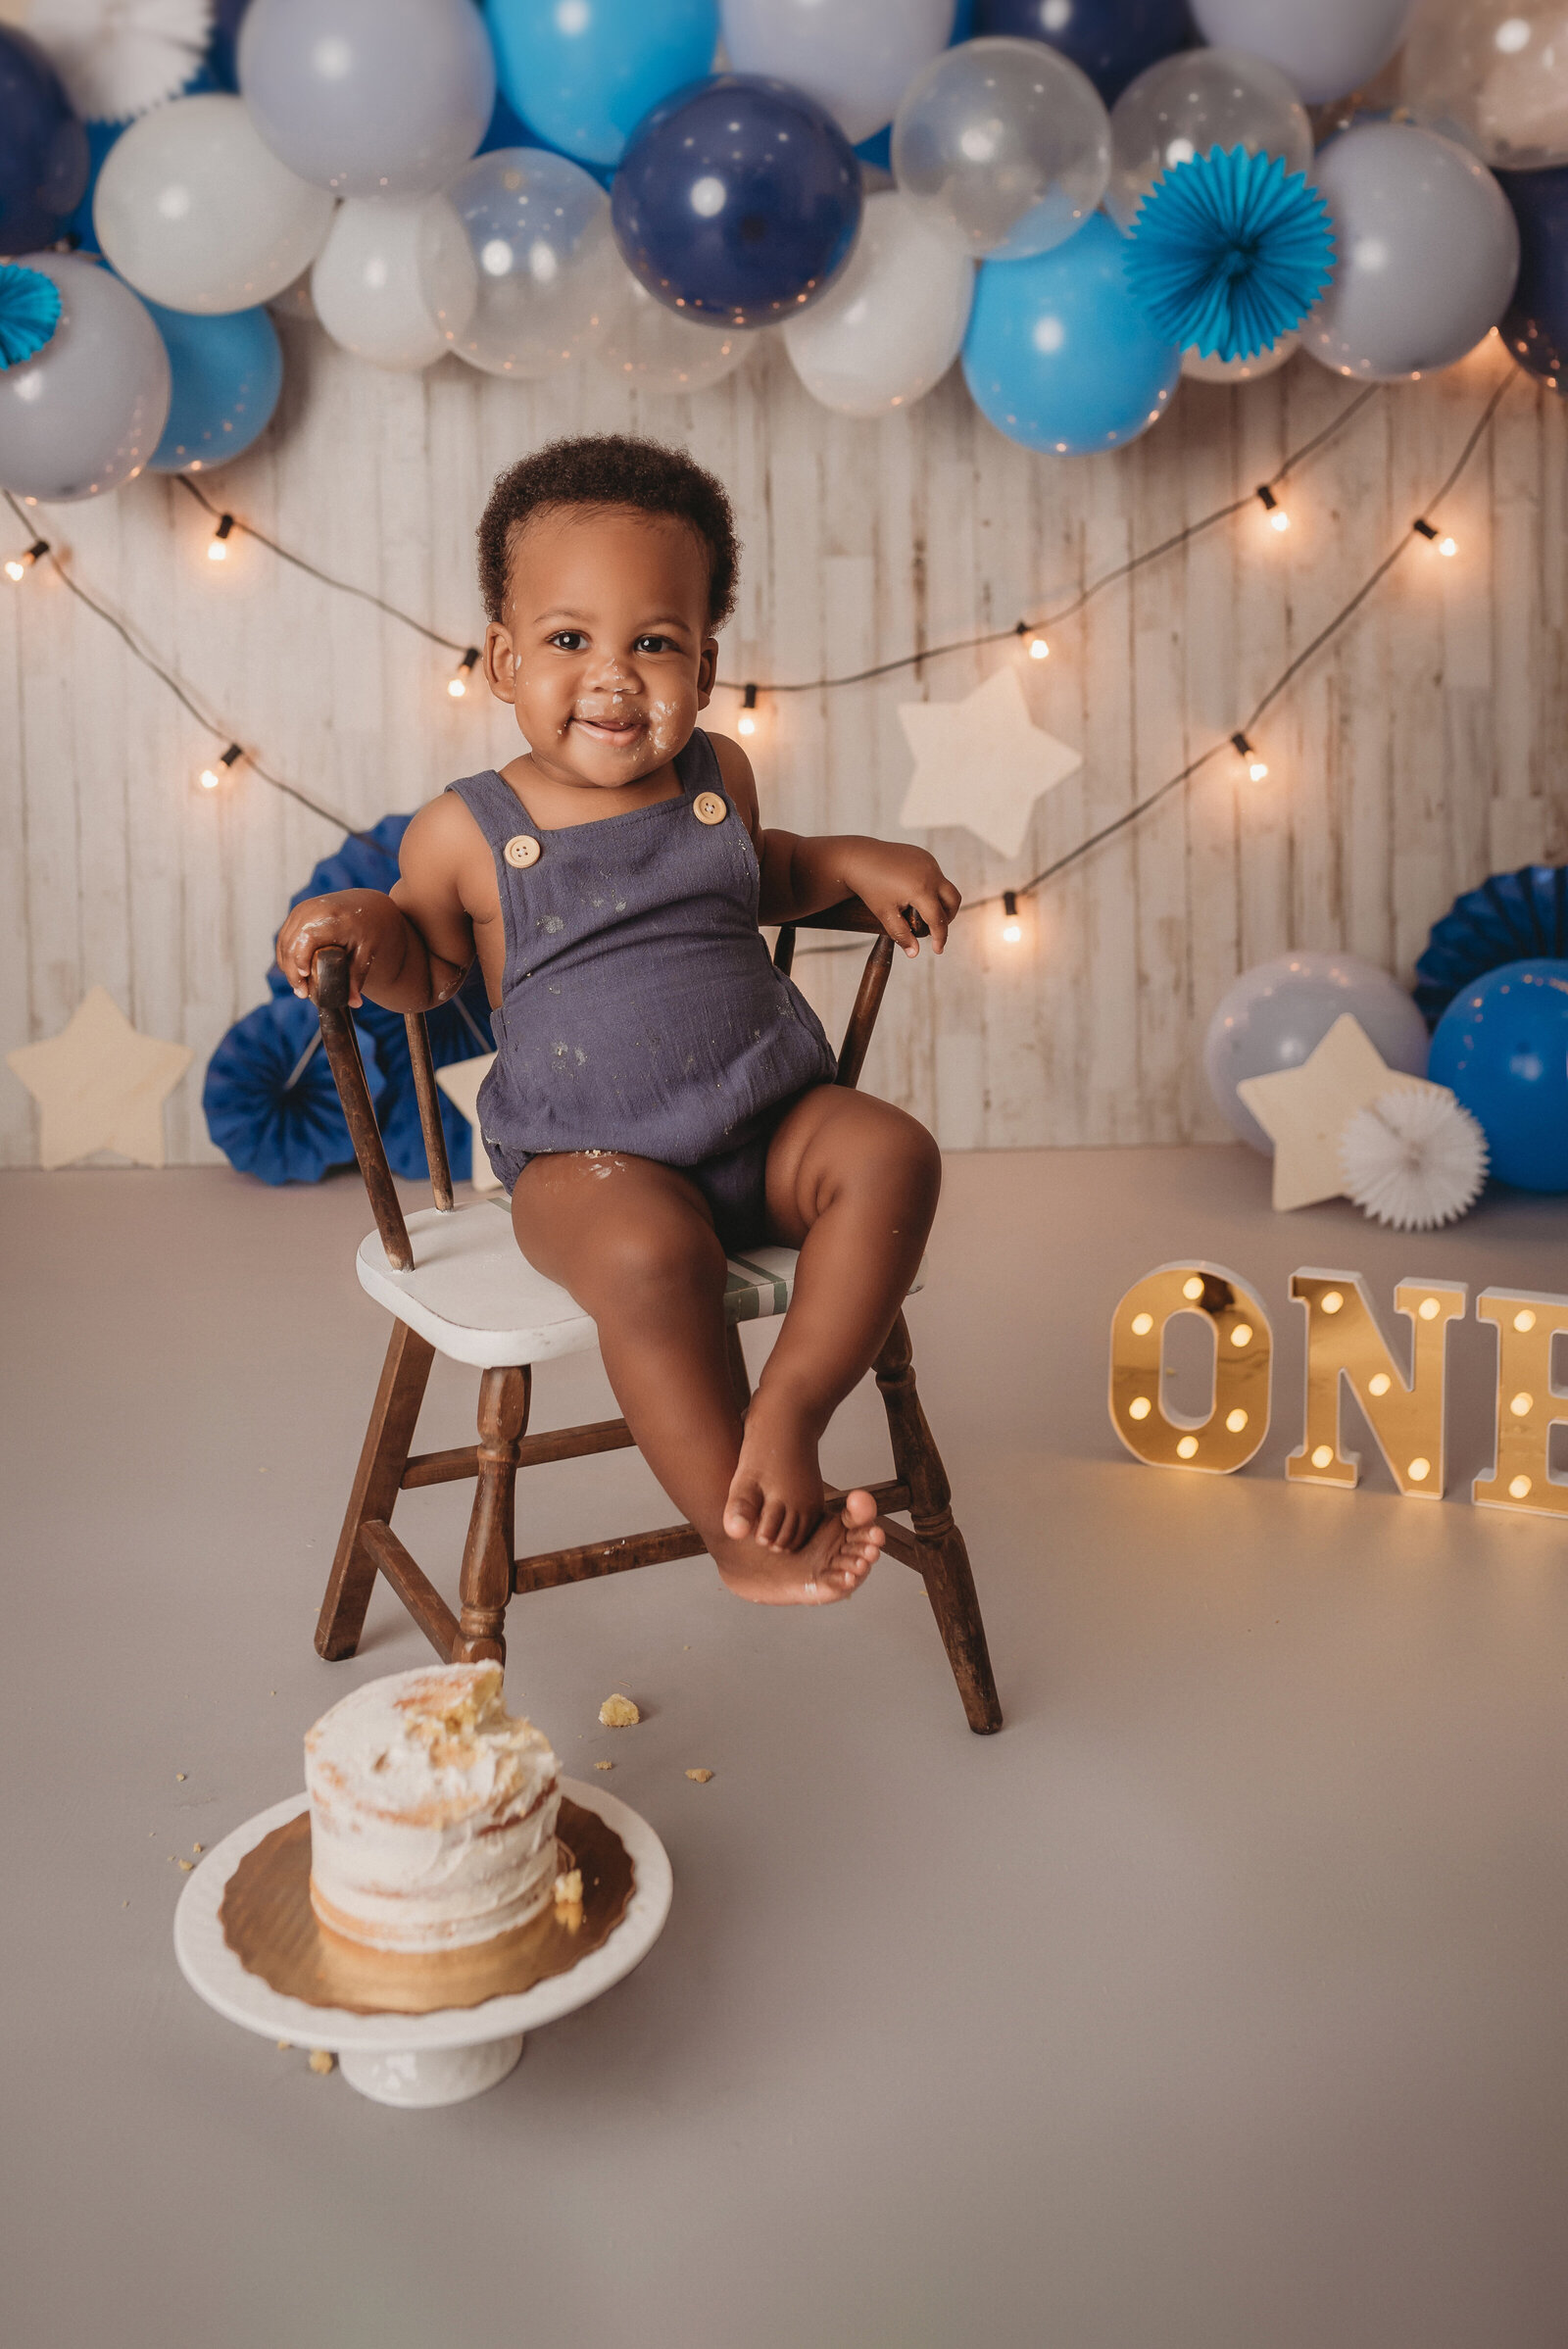 one yar old baby boy at Marietta GA cake smash session sitting in chair wearing blue romper with smash cake beside him and blue balloon garland with string lights in background